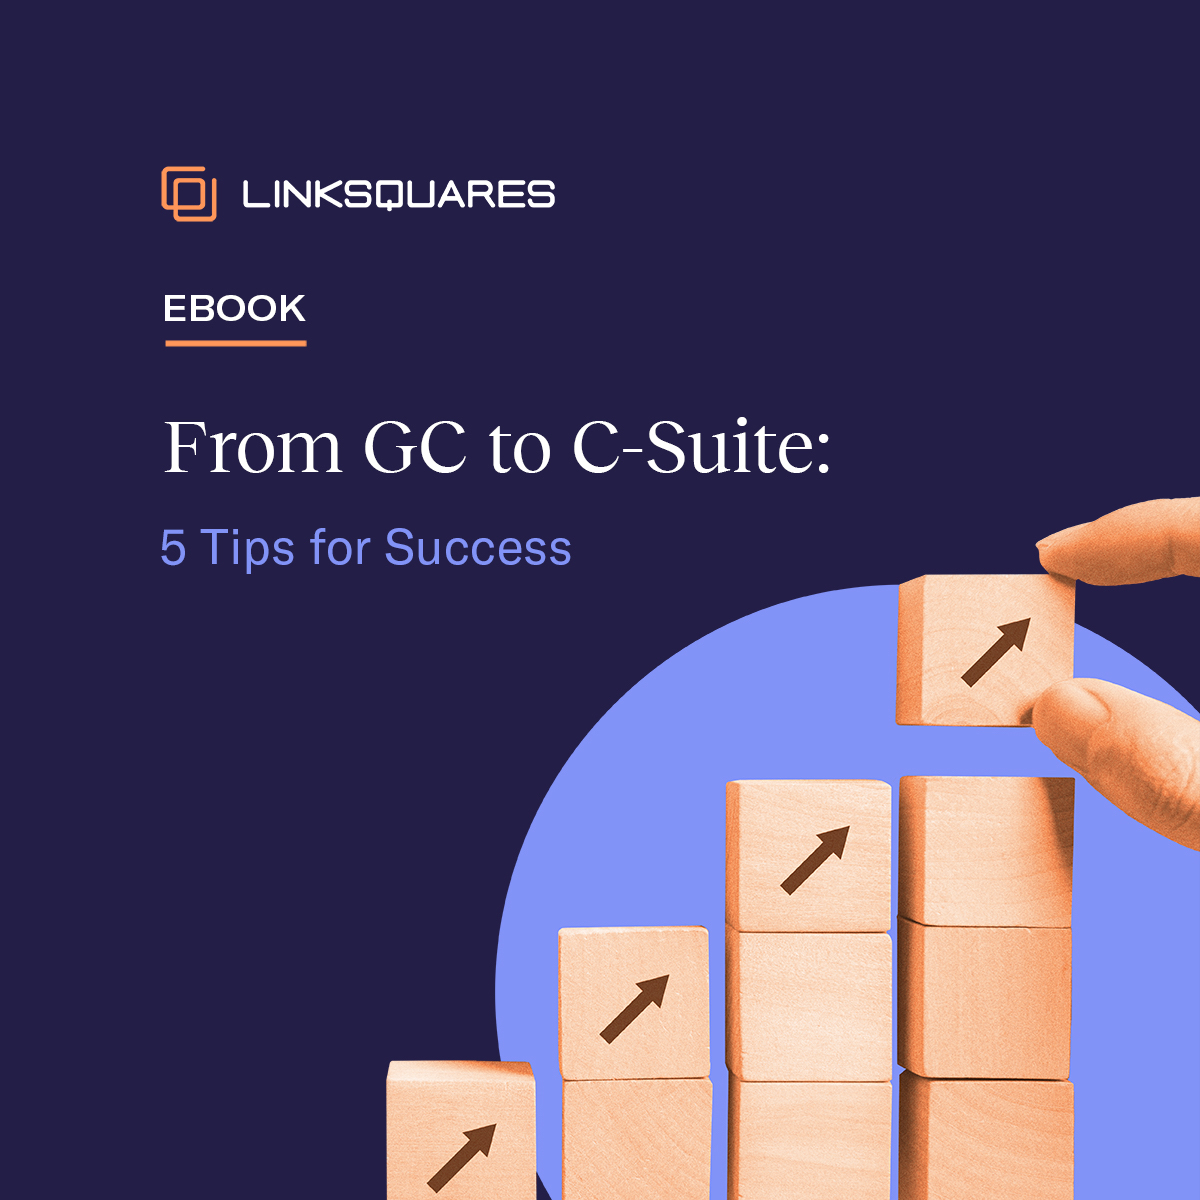 From GC to C-Suite: 5 Tips for Success